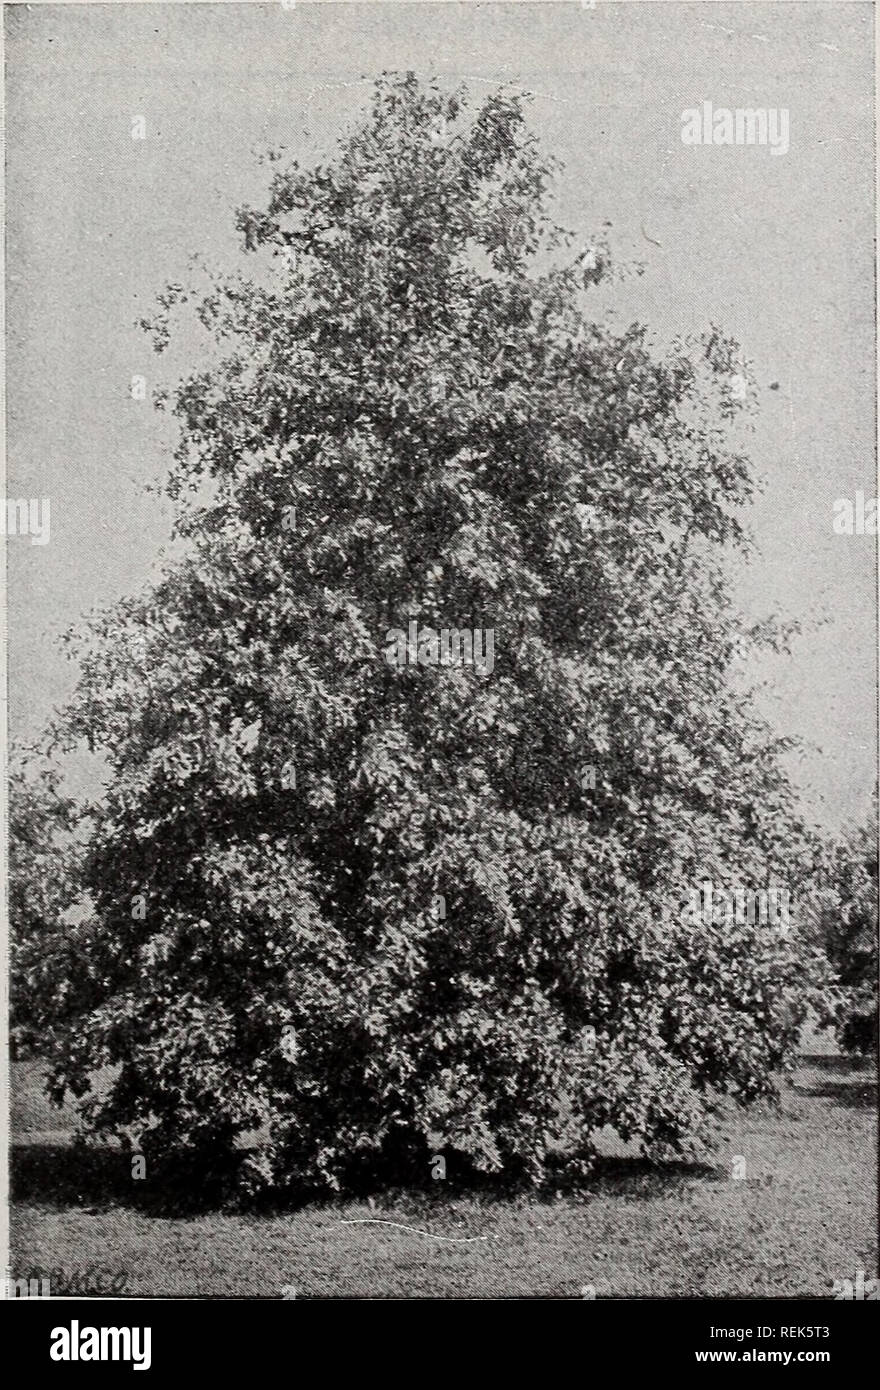 . C. M. Hobbs &amp; Sons. Nurseries Horticulture Catalogs; Evergreens Catalogs; Fruit trees Catalogs; Climbing plants Catalogs; Shrubs Catalogs; Flowers Catalogs; Vegetables Catalogs. C. M. HOBBS &amp; SONS, BRIDGEPORT, INDIANA 9 Populus - The Poplars var. deltoides (Carolina Poplar). Pyramidal in form and vigorous in growth. Leaves large. Only recommended where quick shade is de- sired. var. fasti^iata (Lombardy Poplar). Very rapid grower. Hardy. Fine for screening un- desirable views. Prunus - Plum Pissardii (Purple-leaved Plum). A hand- some, symmetrical small tree of formal appear- ance, h Stock Photo